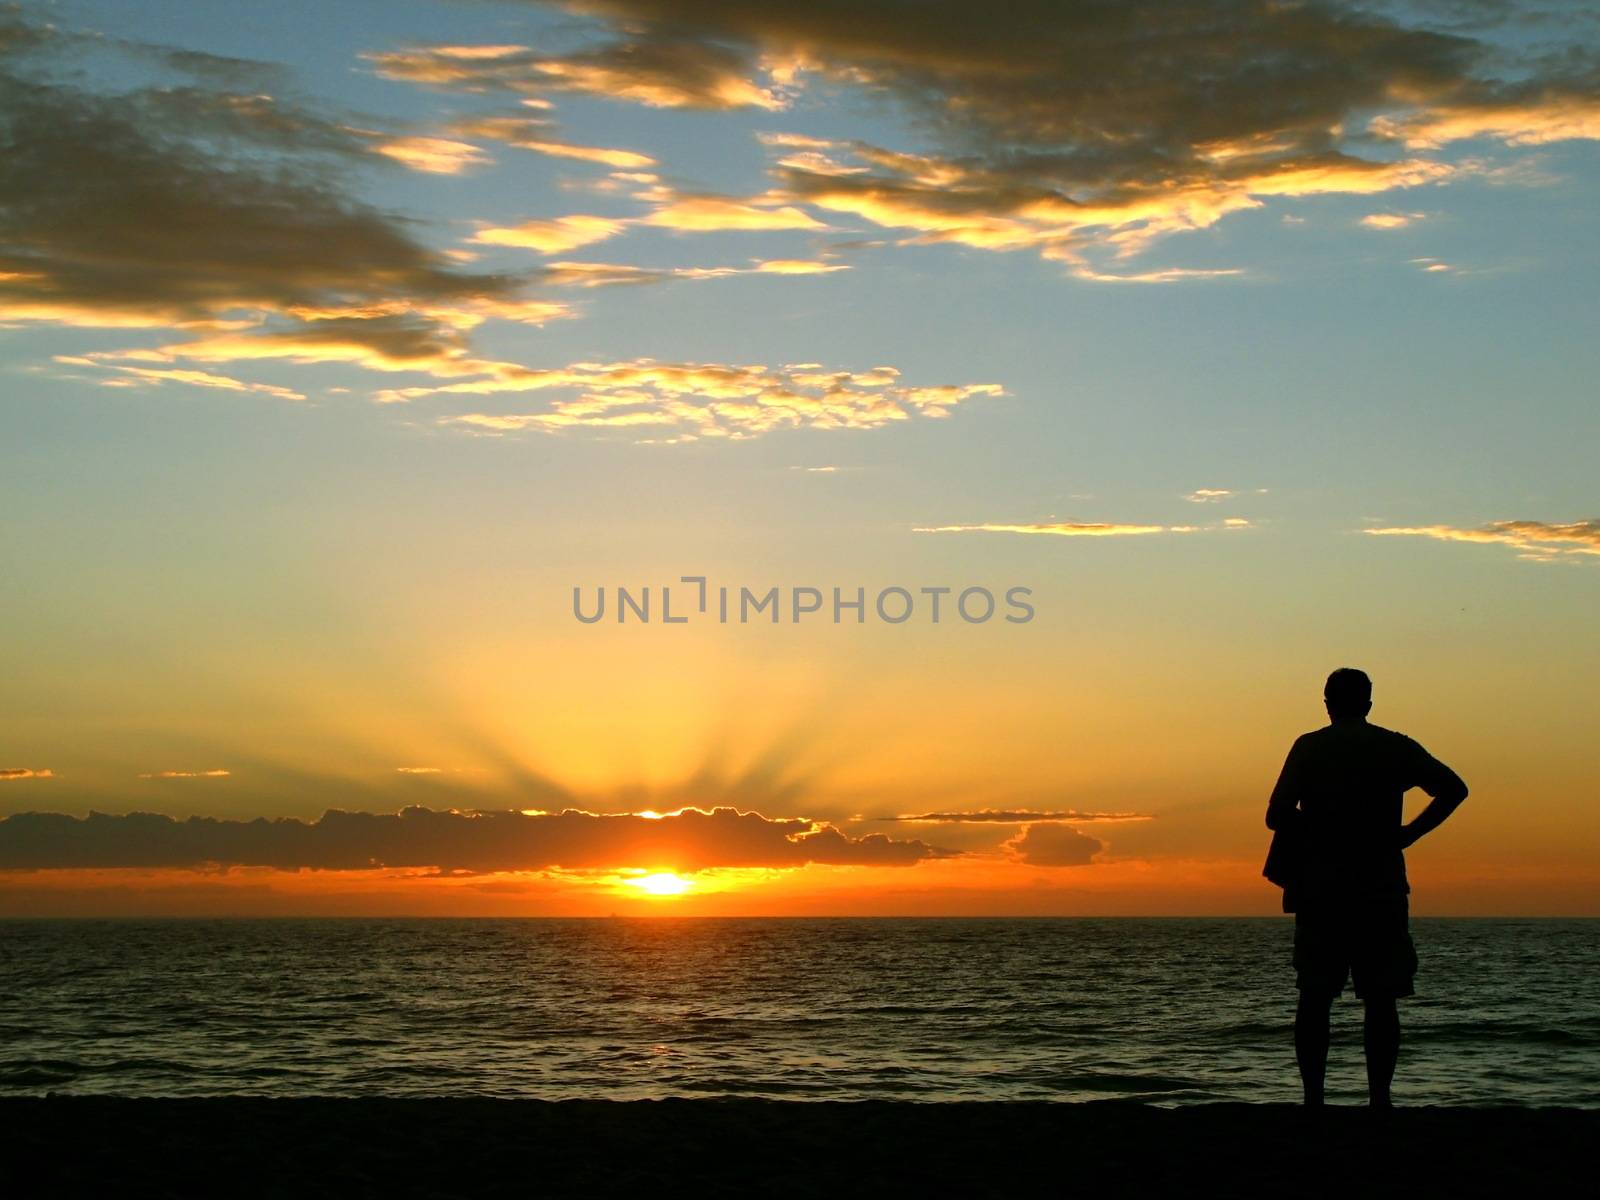 In images An elderly man watches a beautiful sunset at the sea. The man sits motionless with his back to the camera and admires the bright colors of the sunset.